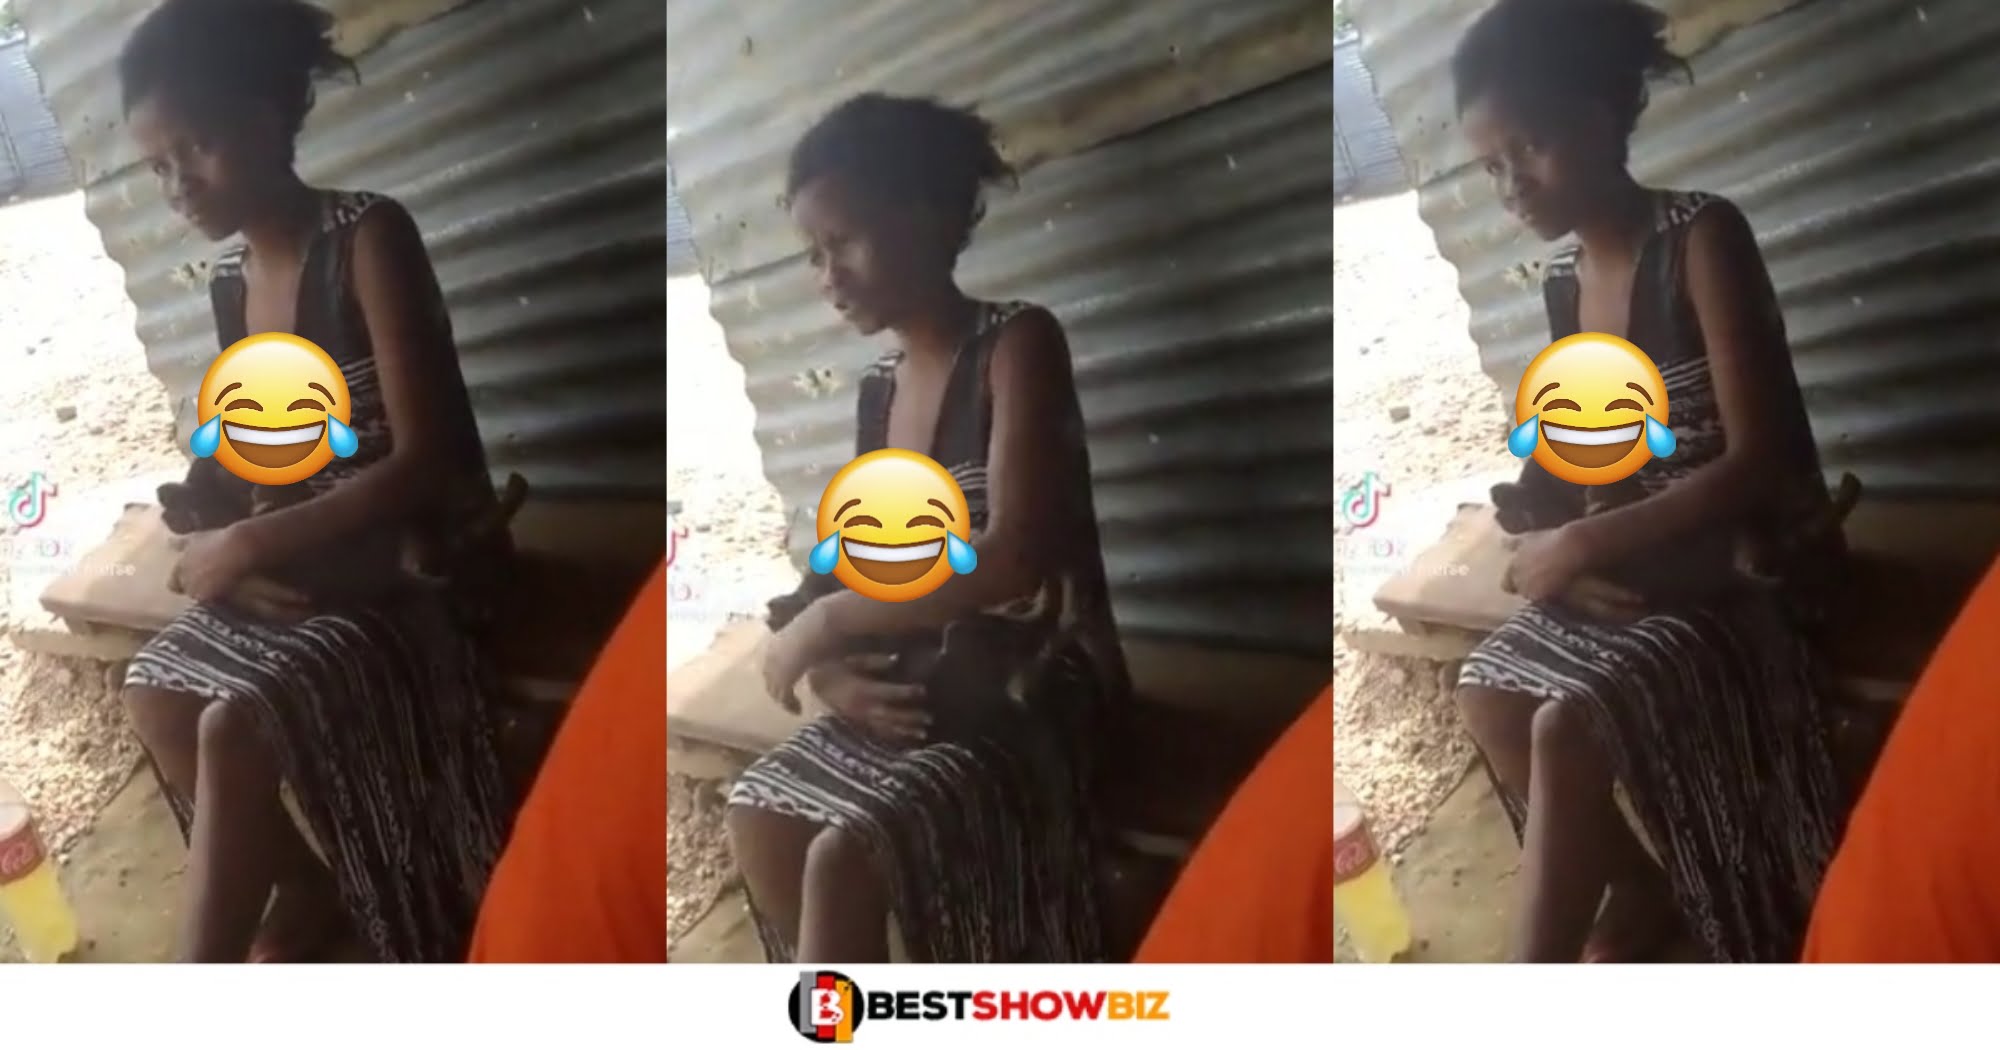 New Video Of Woman Breastfeeding A Dog Like A Baby Stirs The Internet